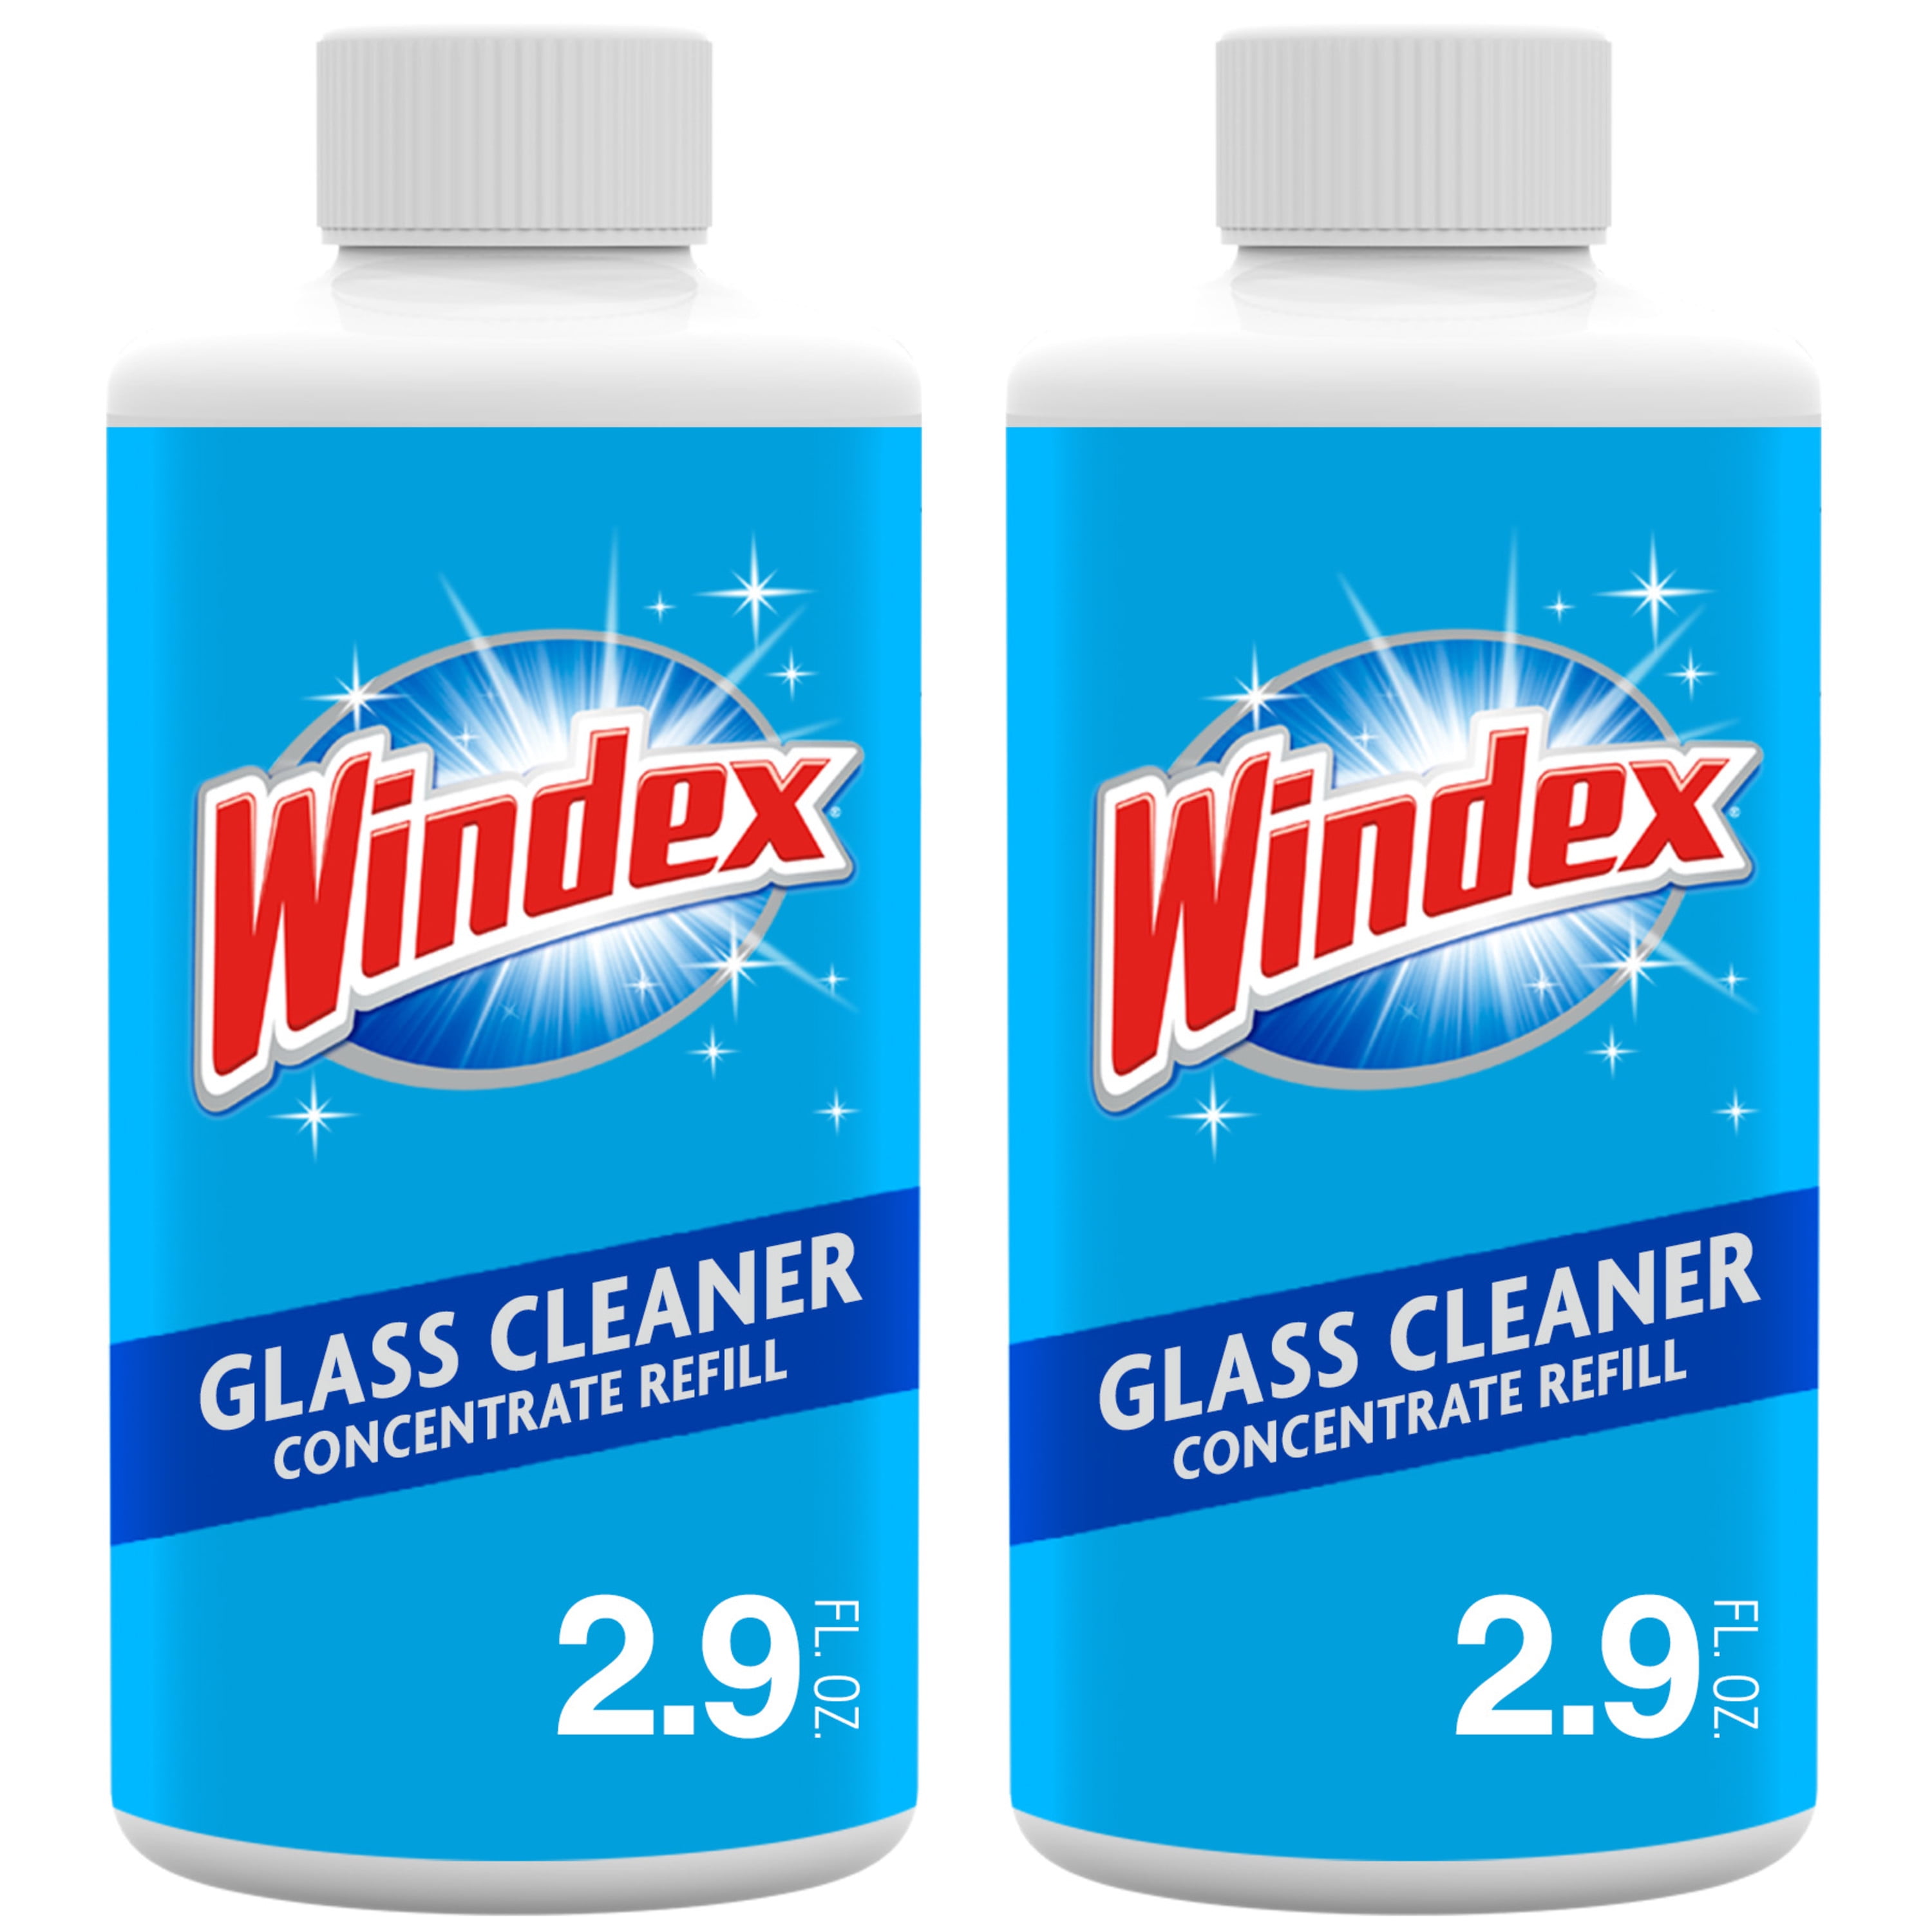 Windex Glass Cleaner Concentrate, Two 2.9 Ounce Concentrated Refill Bottles